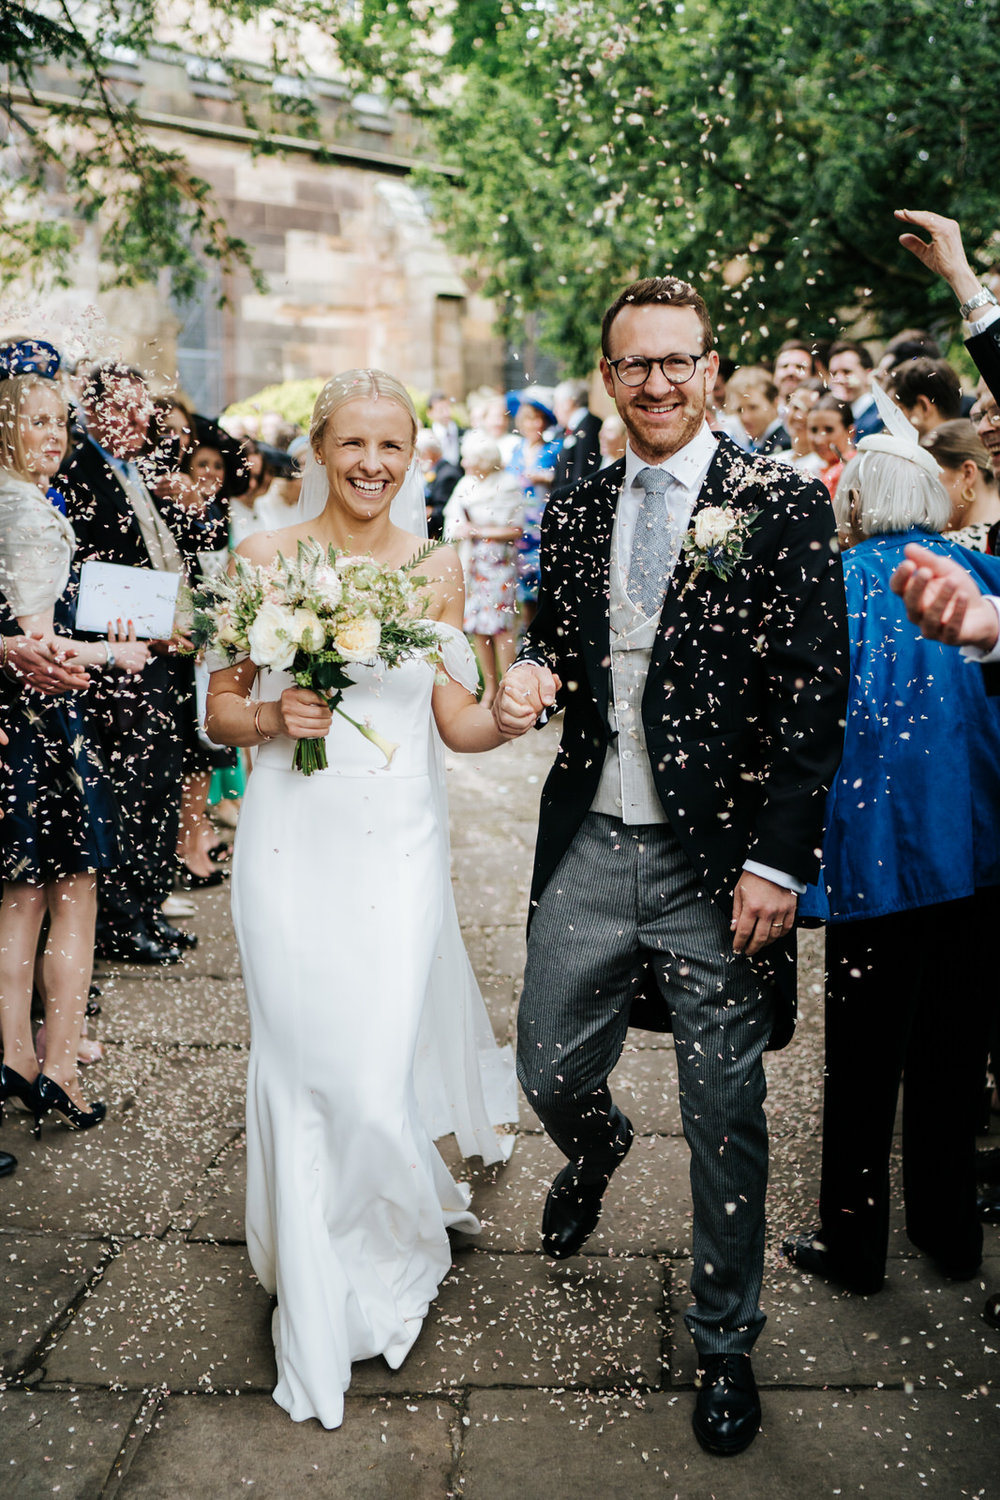  Bride and groom exit the church and walk down the pathway as guests throw confetti at them 